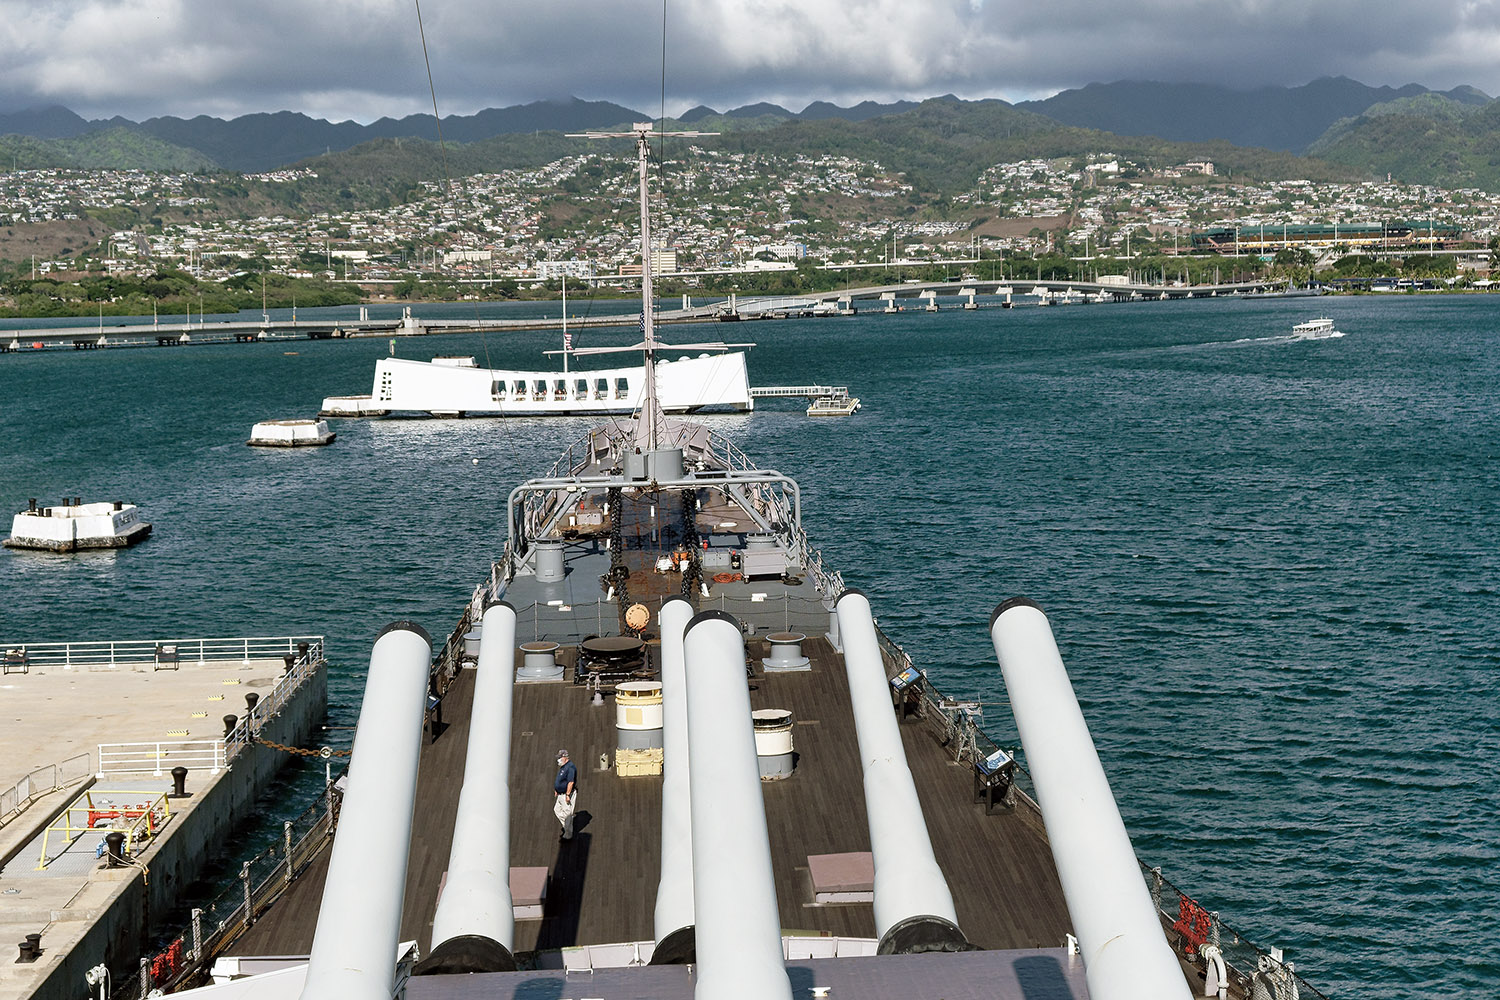 The view from the bridge onto0 the U.S.S. Arizona Memorial and the harbor